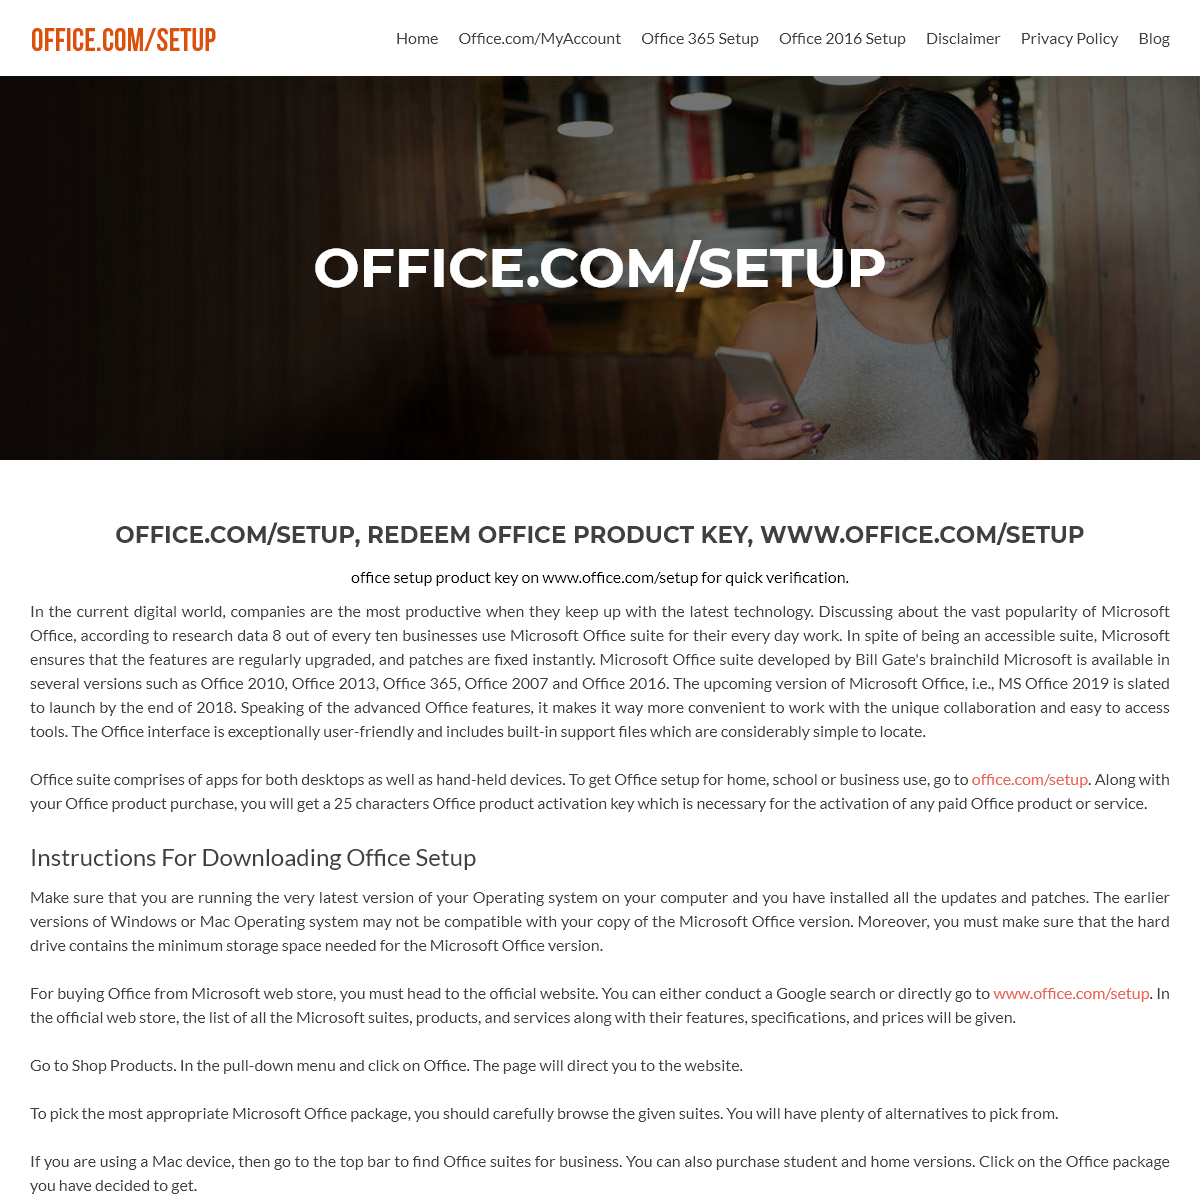 A complete backup of offiicecomms.com